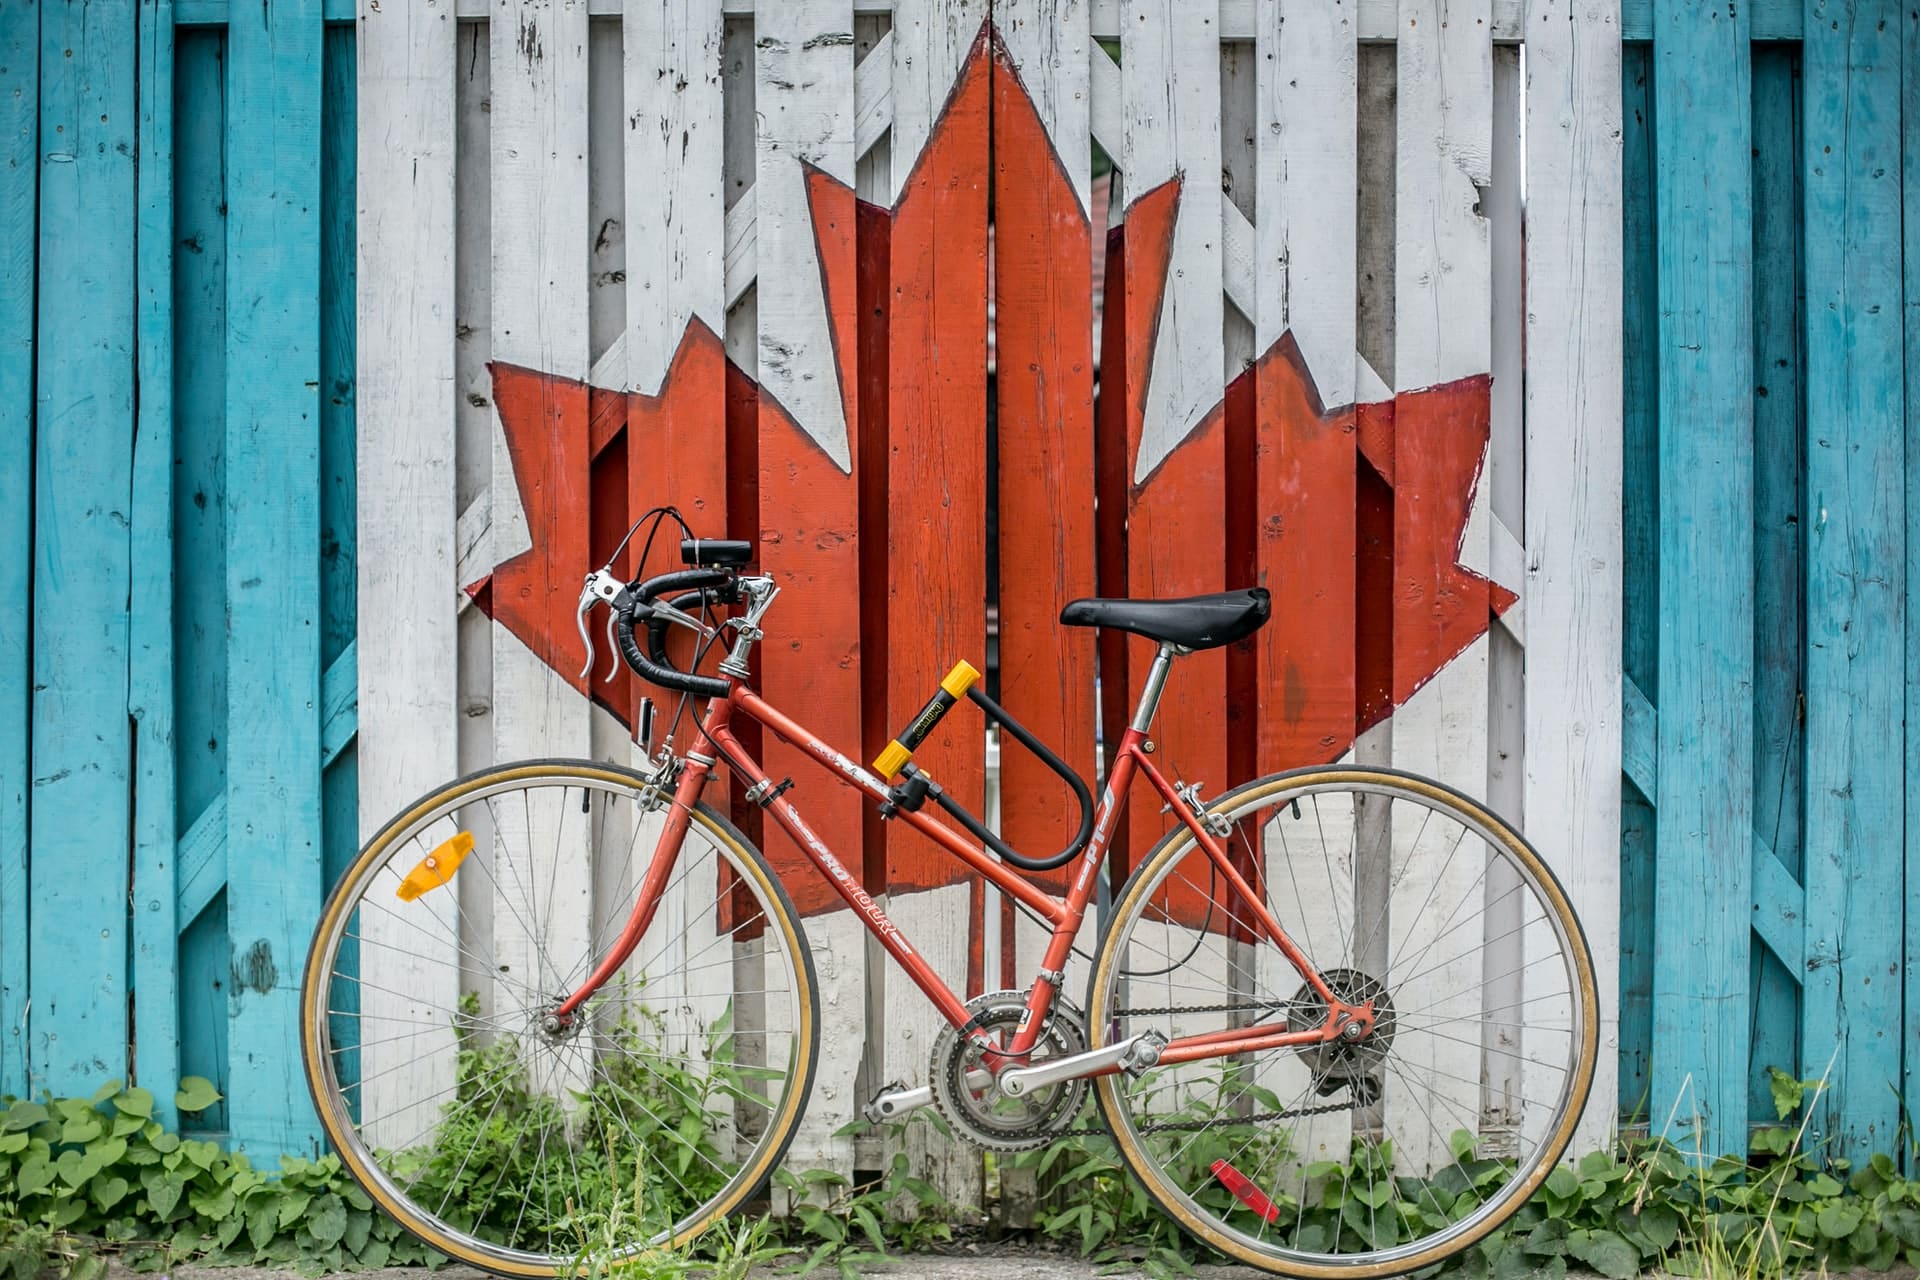 Bicycle against a wall painted with the Canada flag, representing immigration to Canada